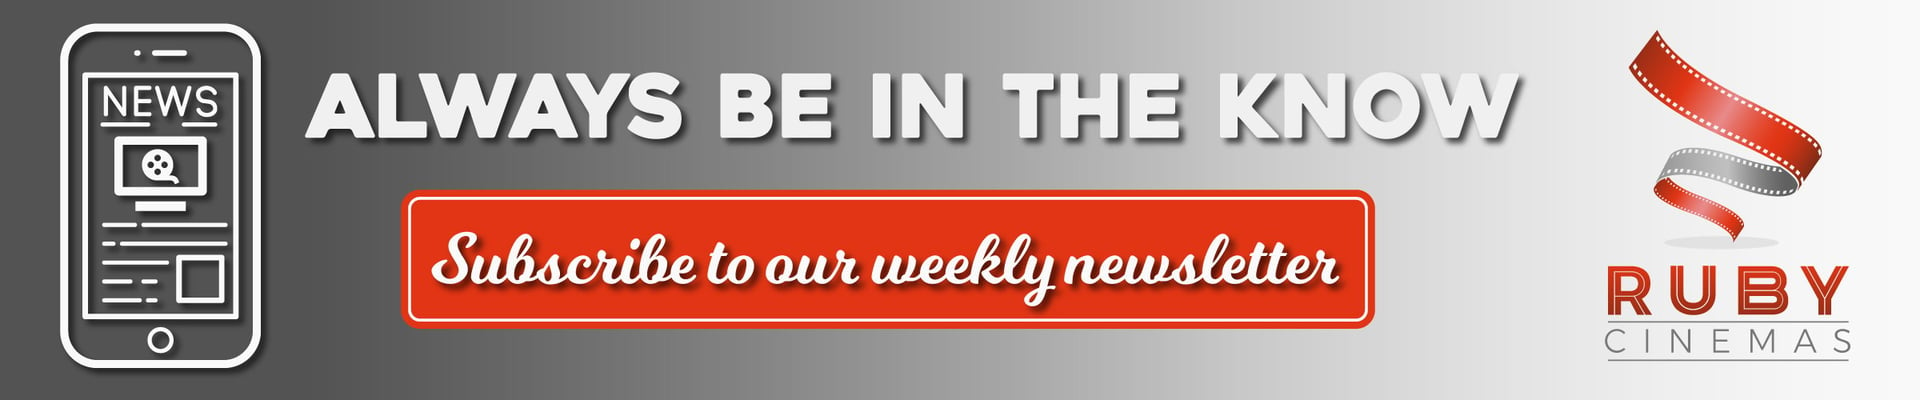 subscribe to our weekly newsletter